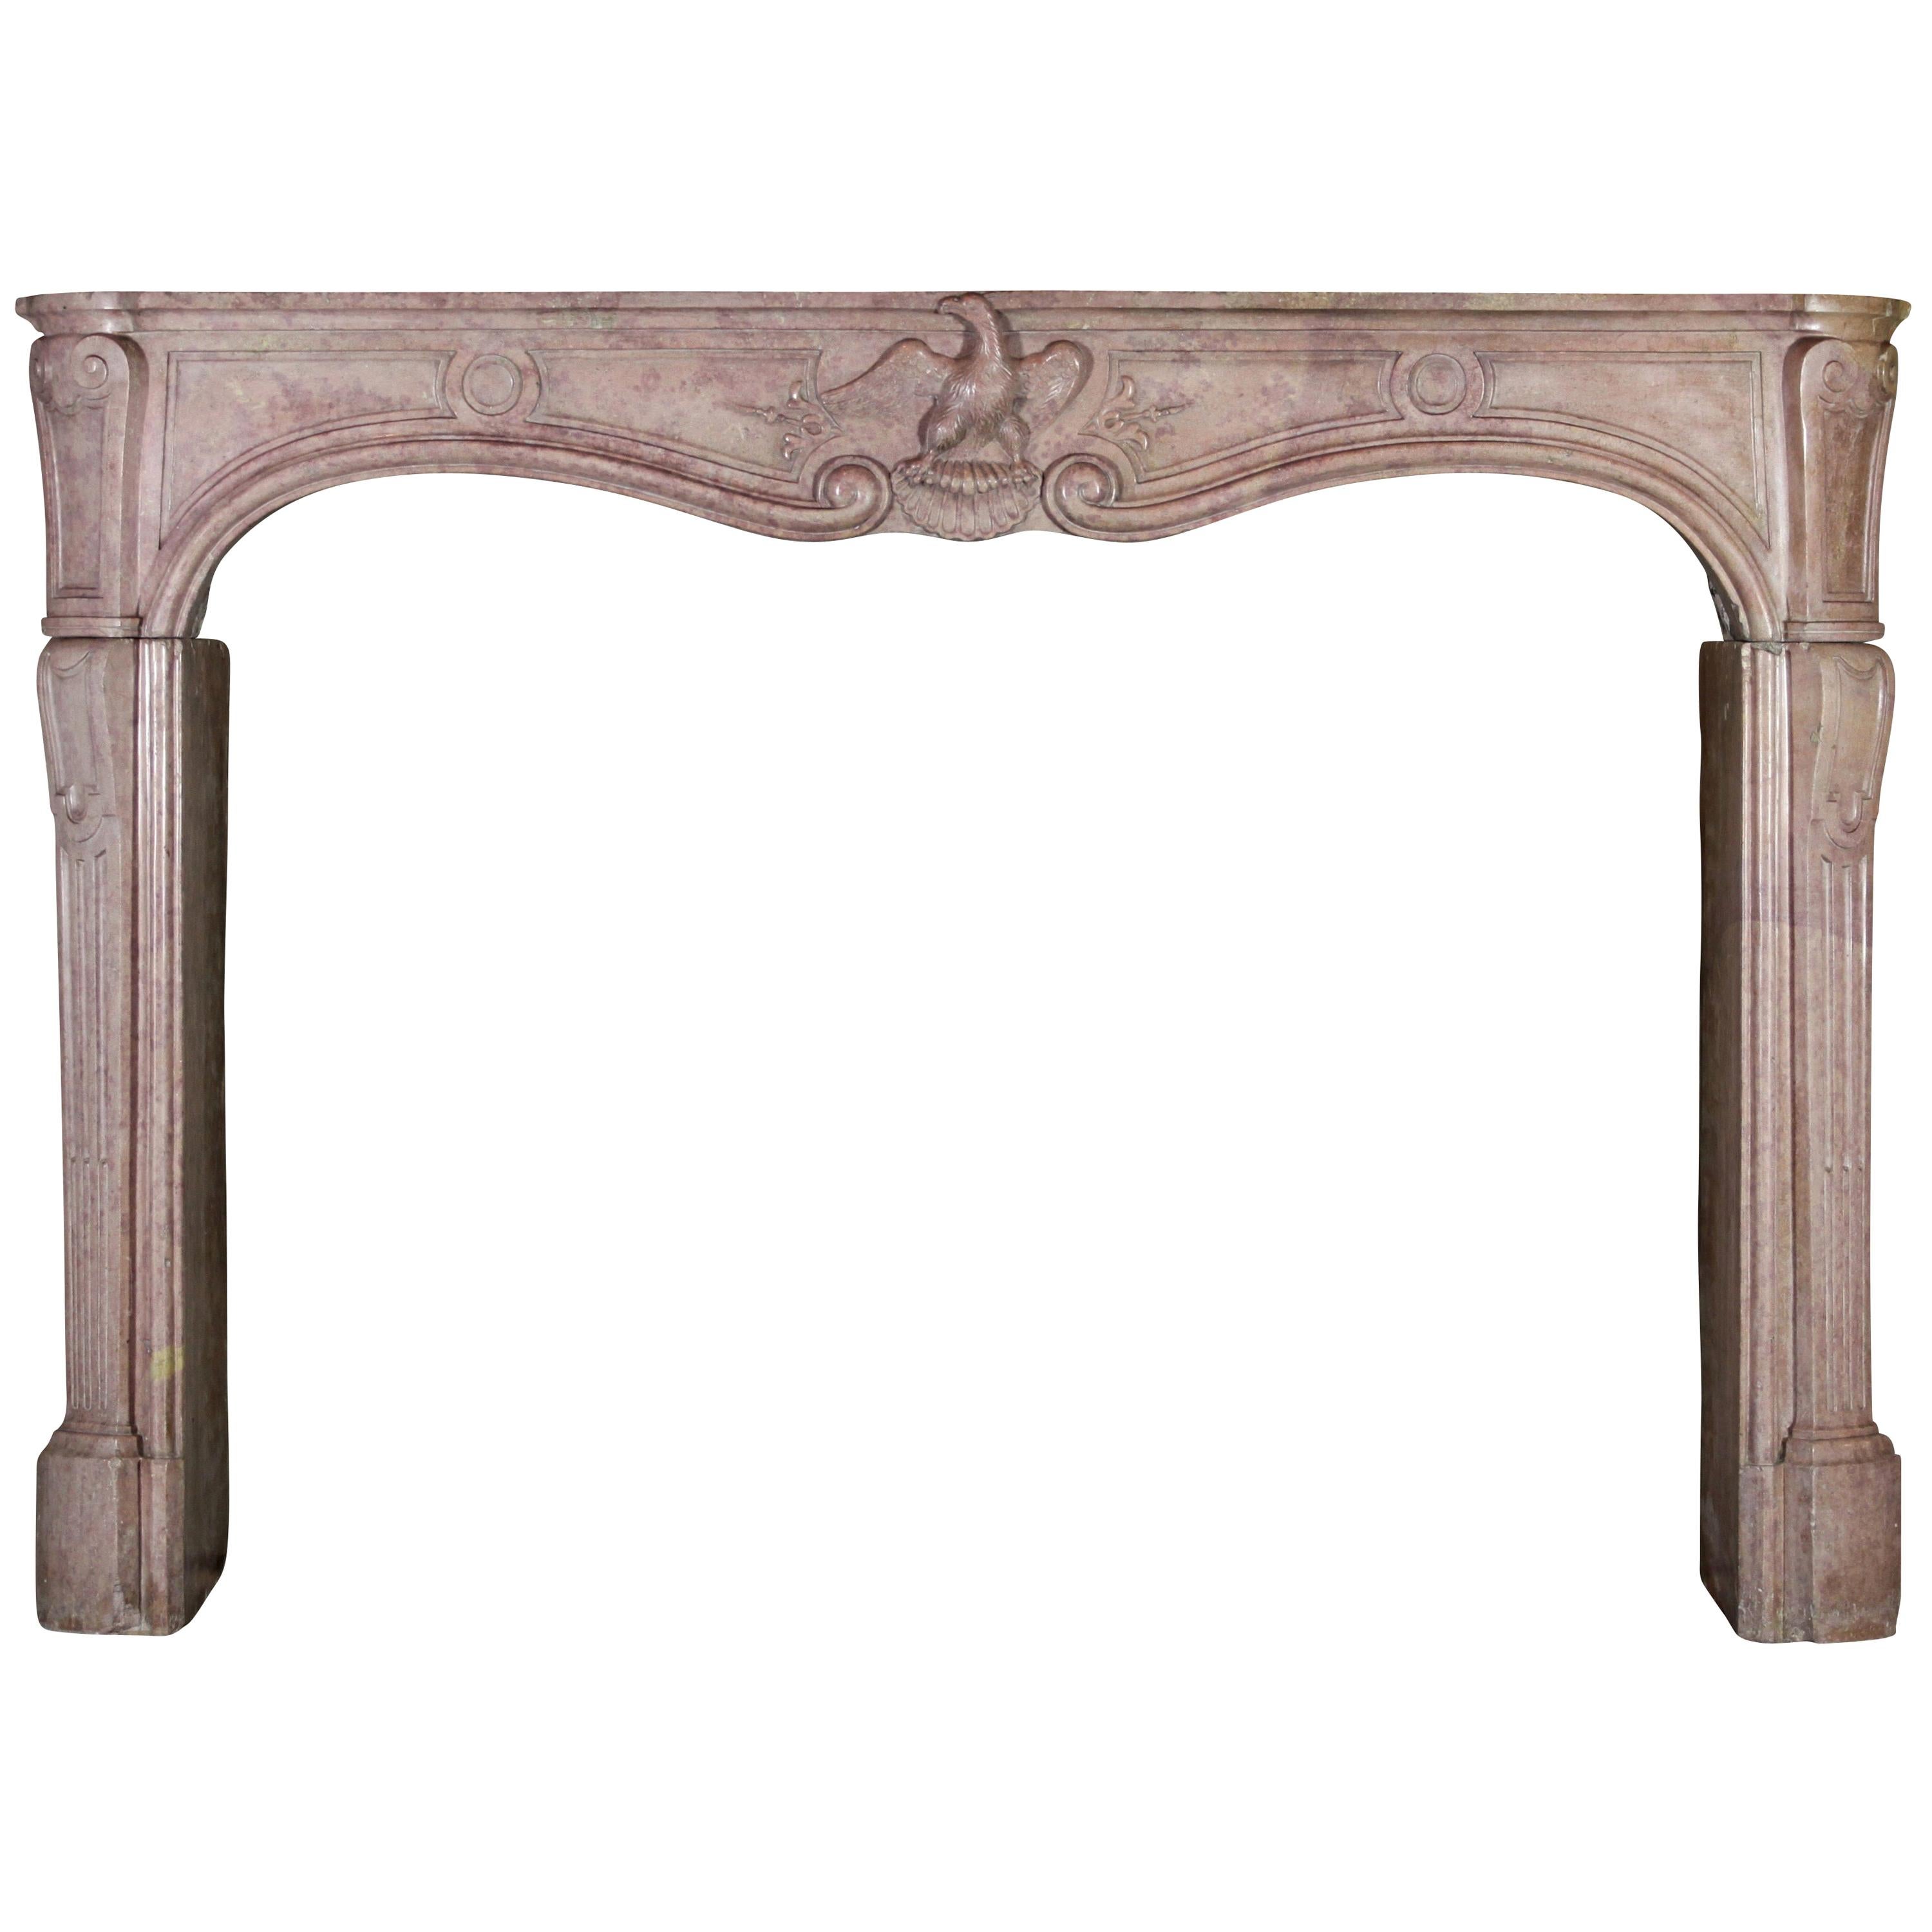 French Imperial Original Antique French Fireplace Surround For Sale